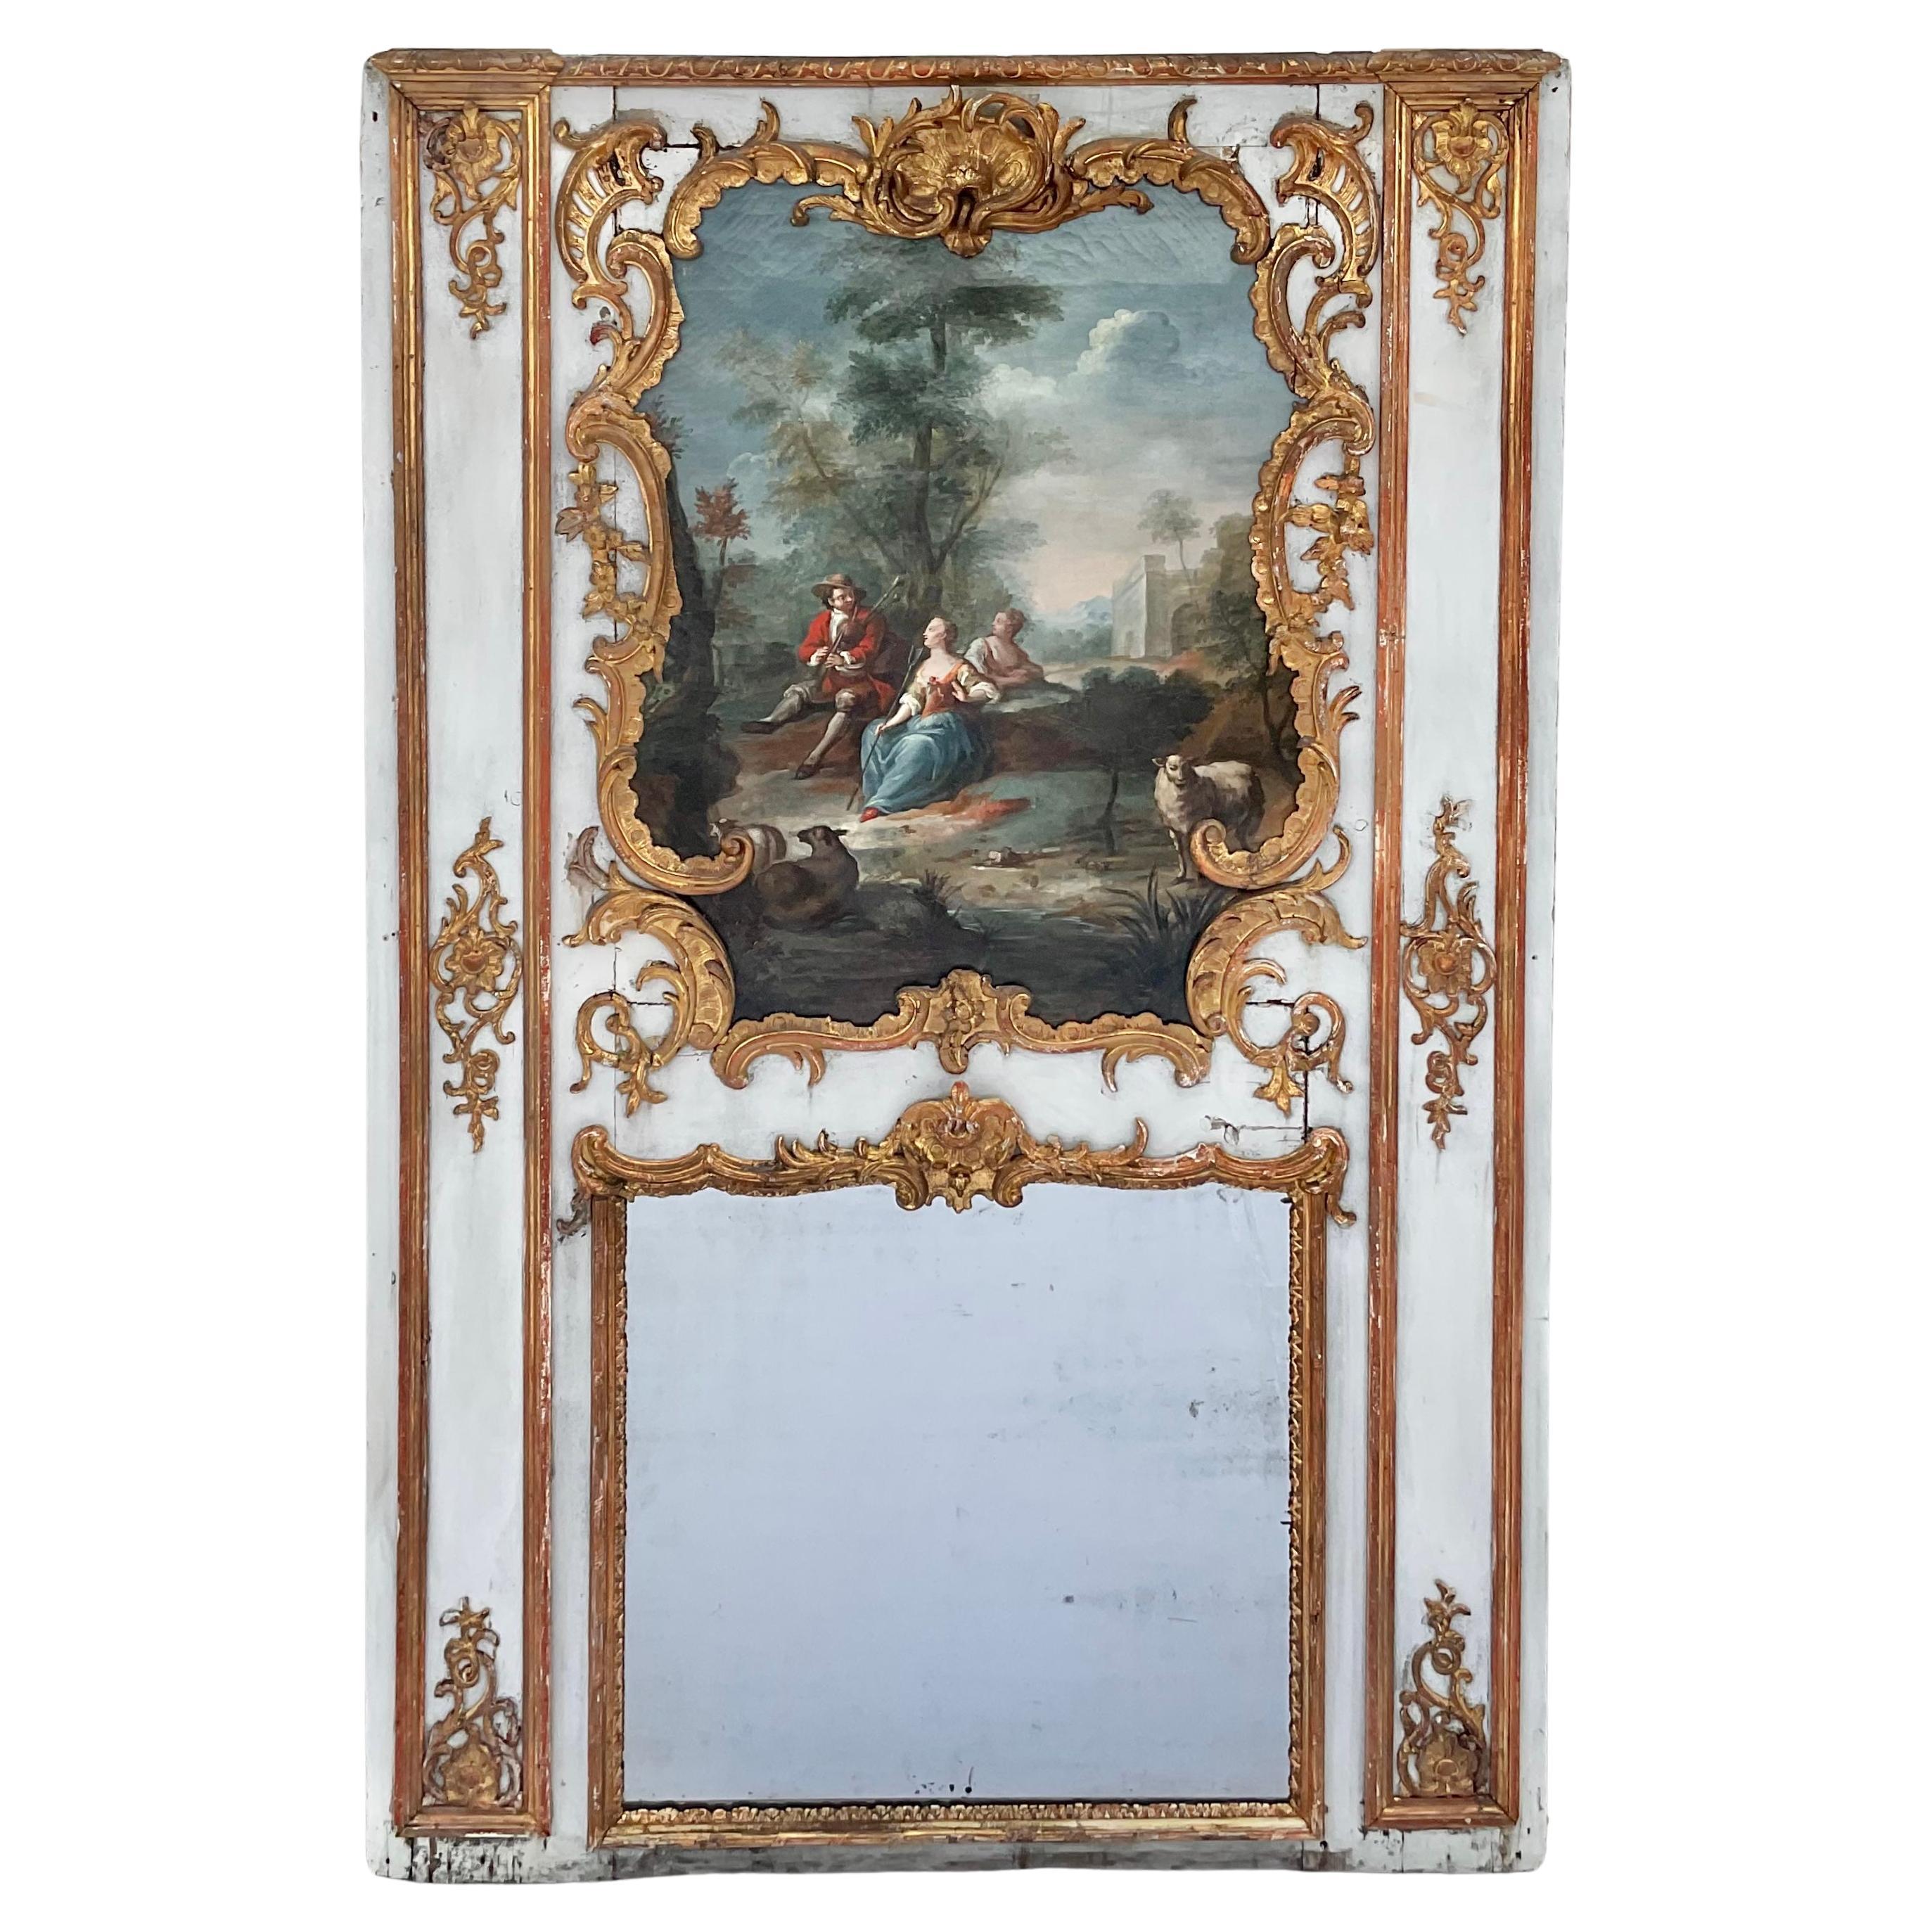 Monumental 18th Century French Giltwood Trumeau Mirror with Original Painting